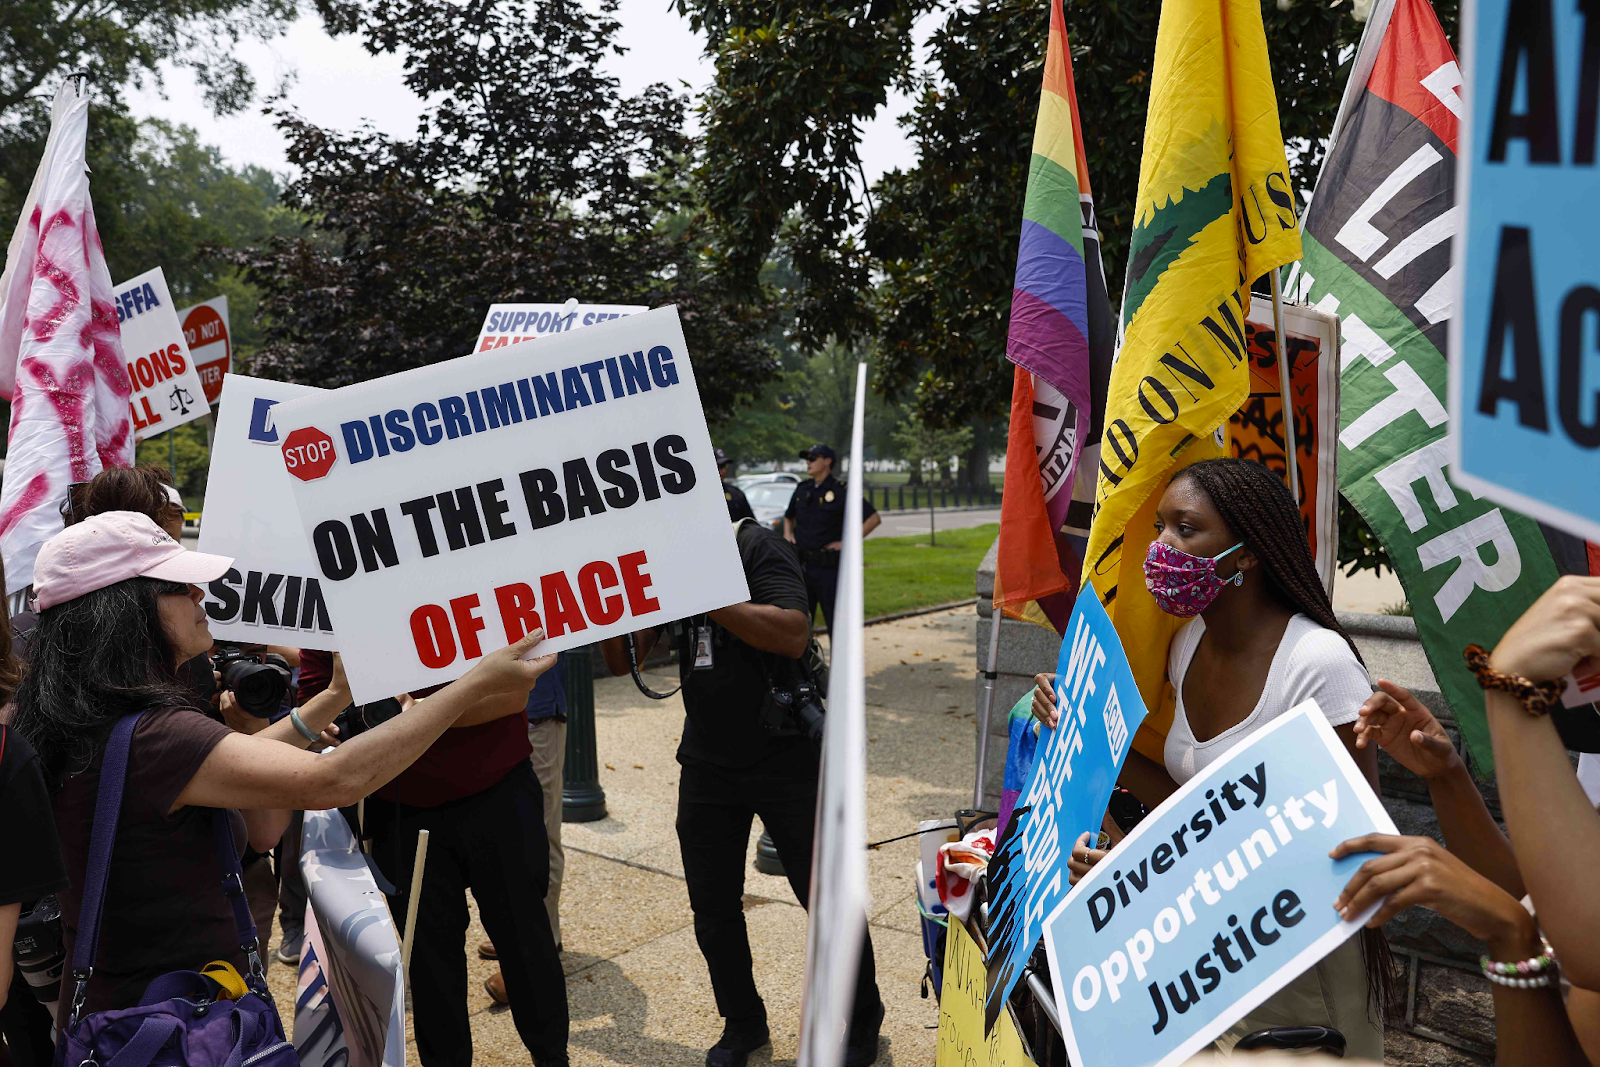 Opposing sides protest on the issue of affirmative action. (Anna Moneymaker / Getty Images)